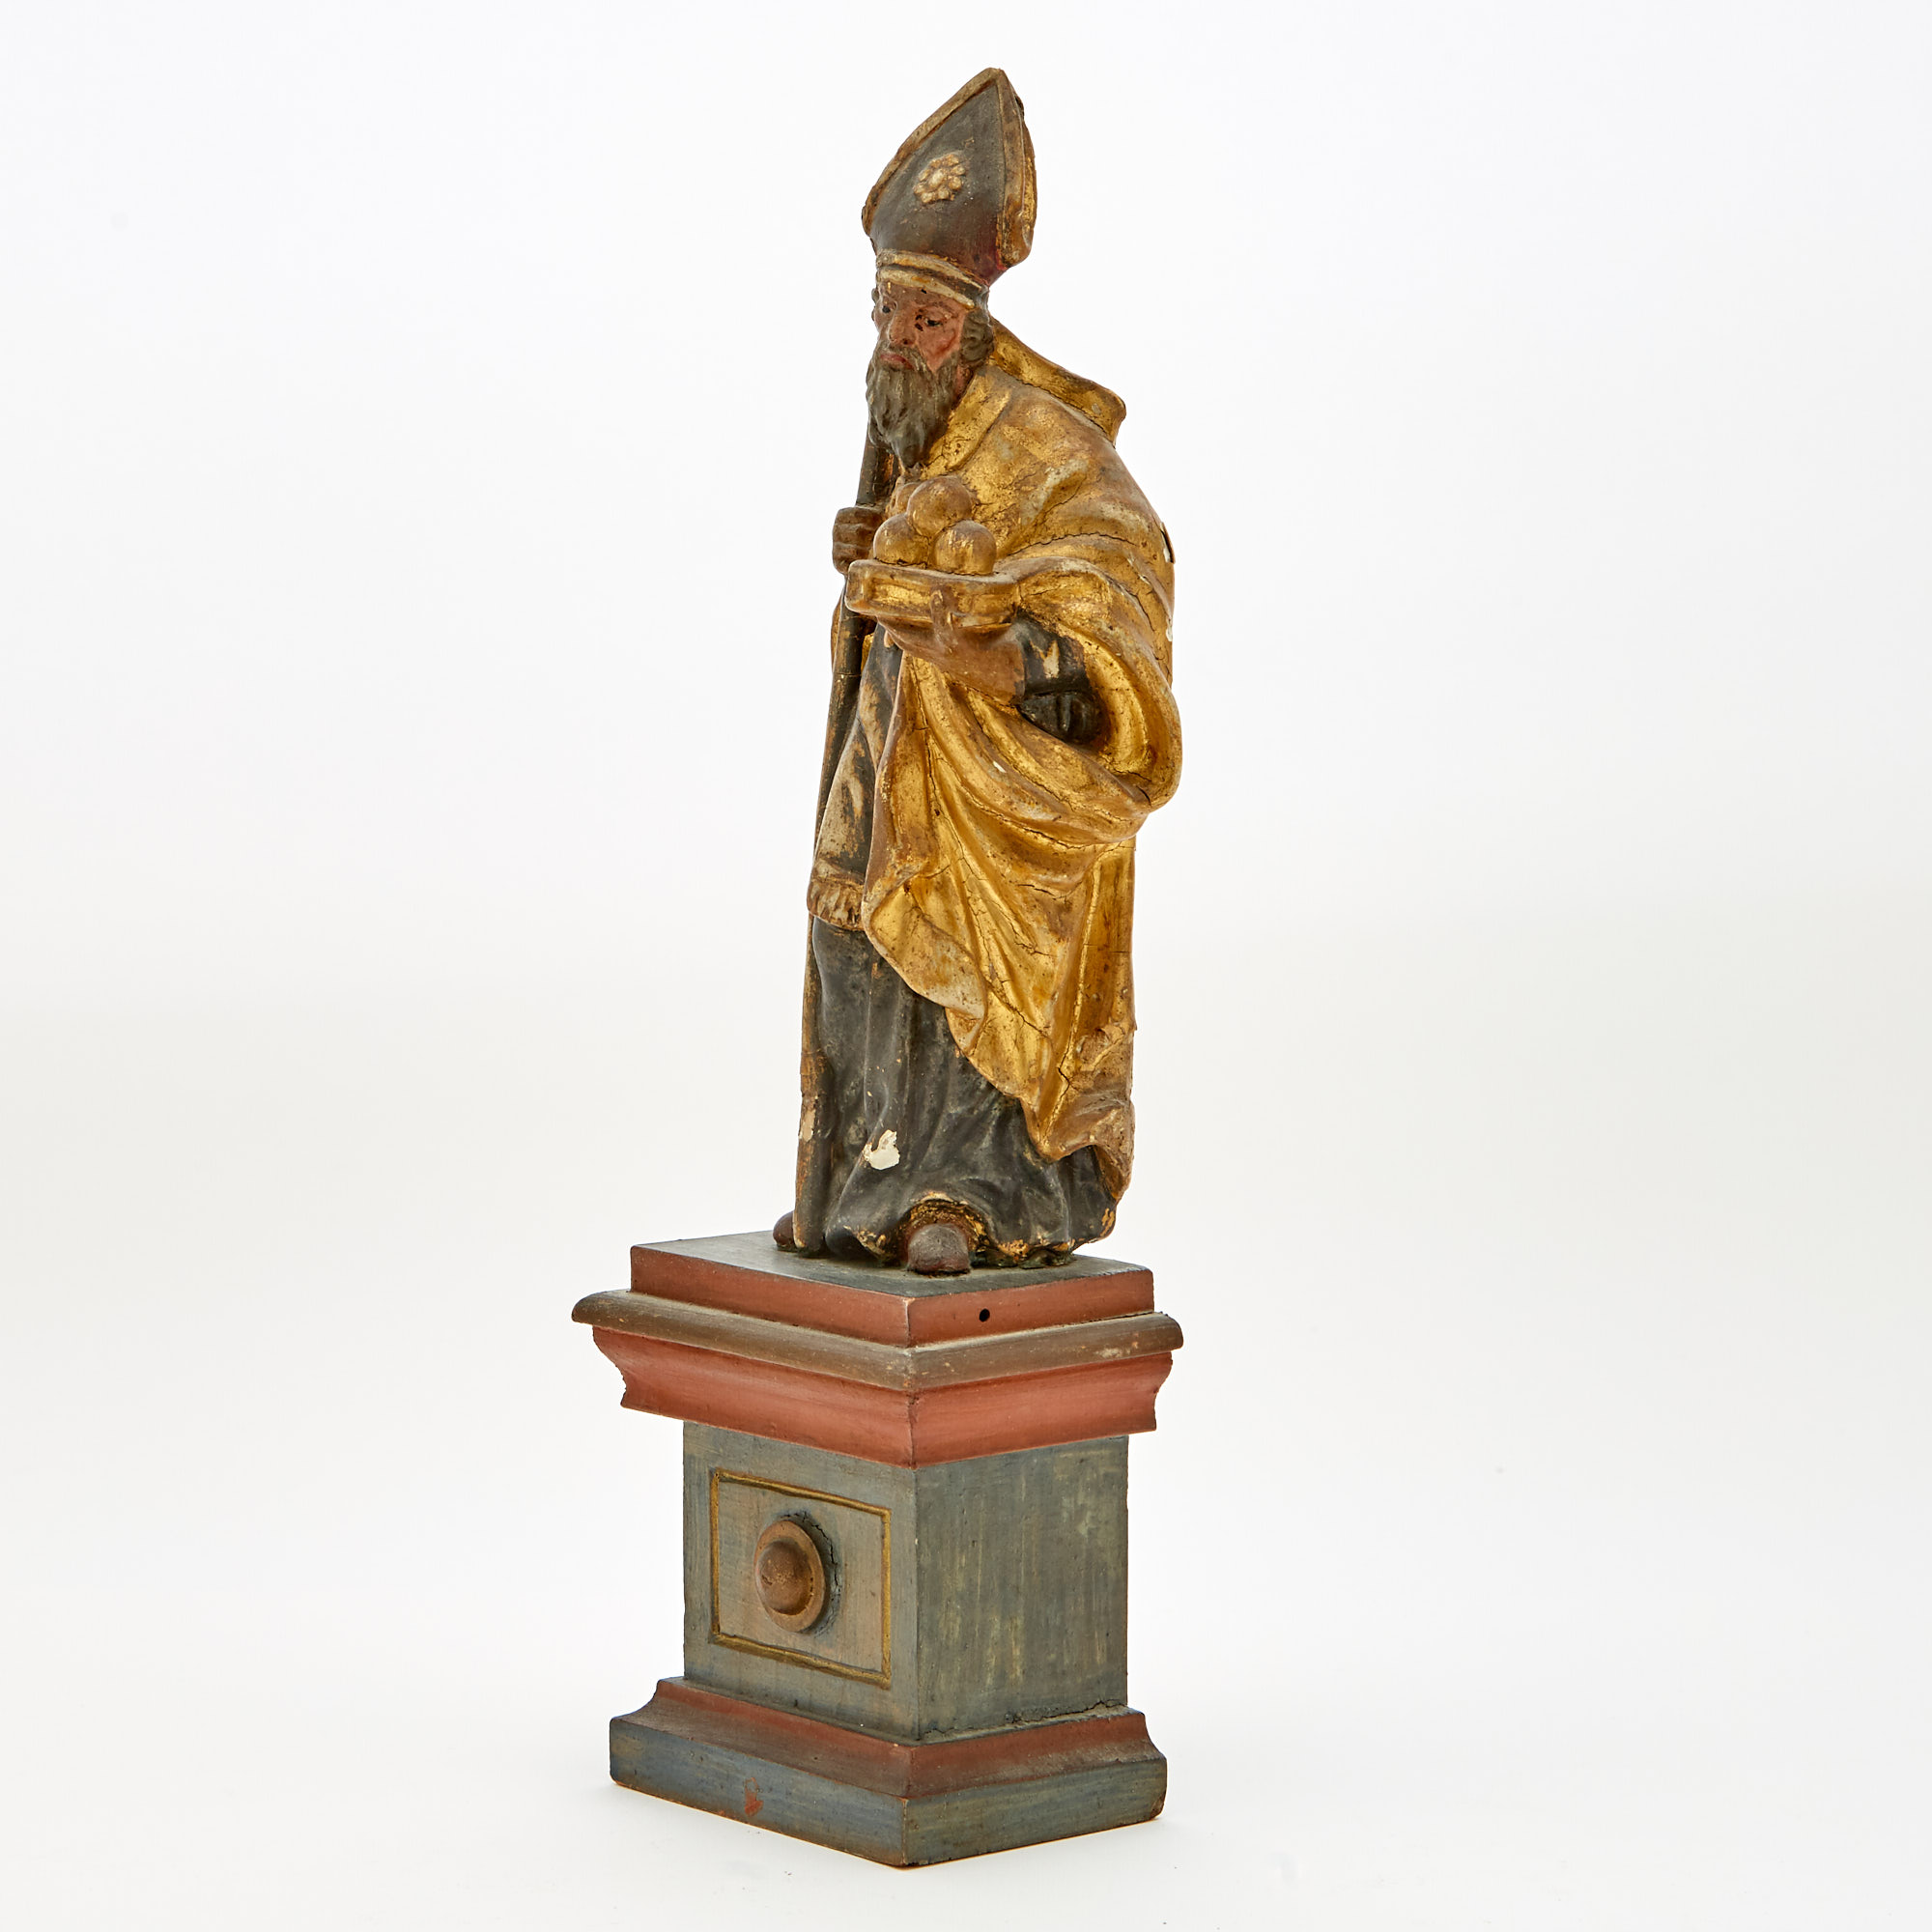 Continental Polychromed and Parcel-Gilt Carved Wood Figure of St. Nicholas - Image 2 of 3